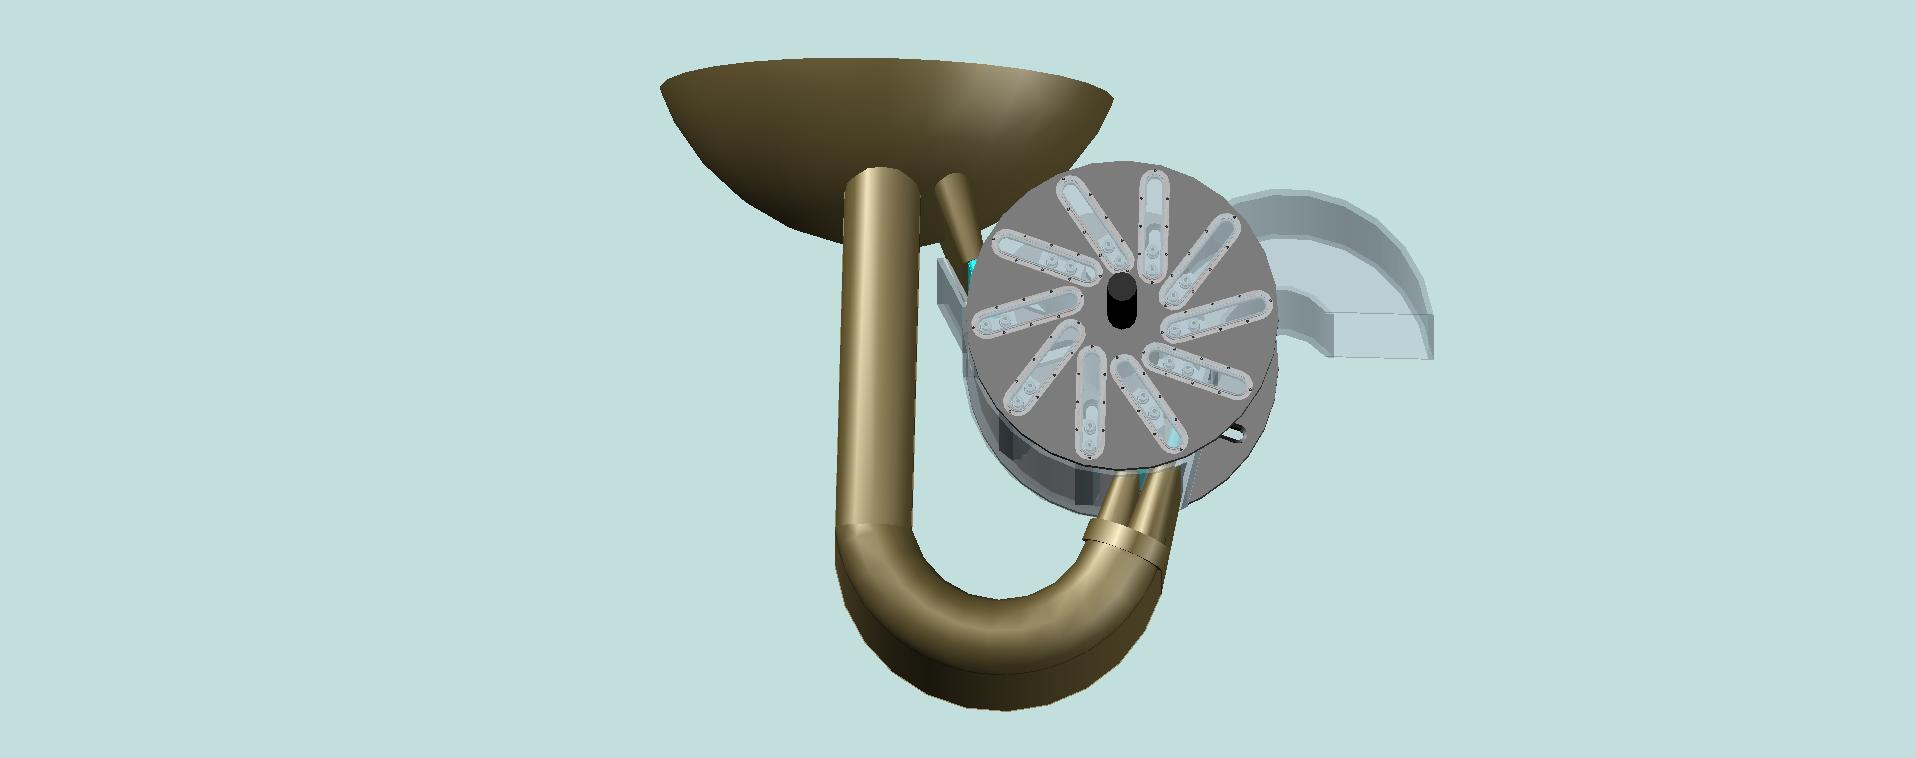 The appearance of the variant turbine rotor equipped by movable blades, which are under the influence of water falling from a height through three nozzles